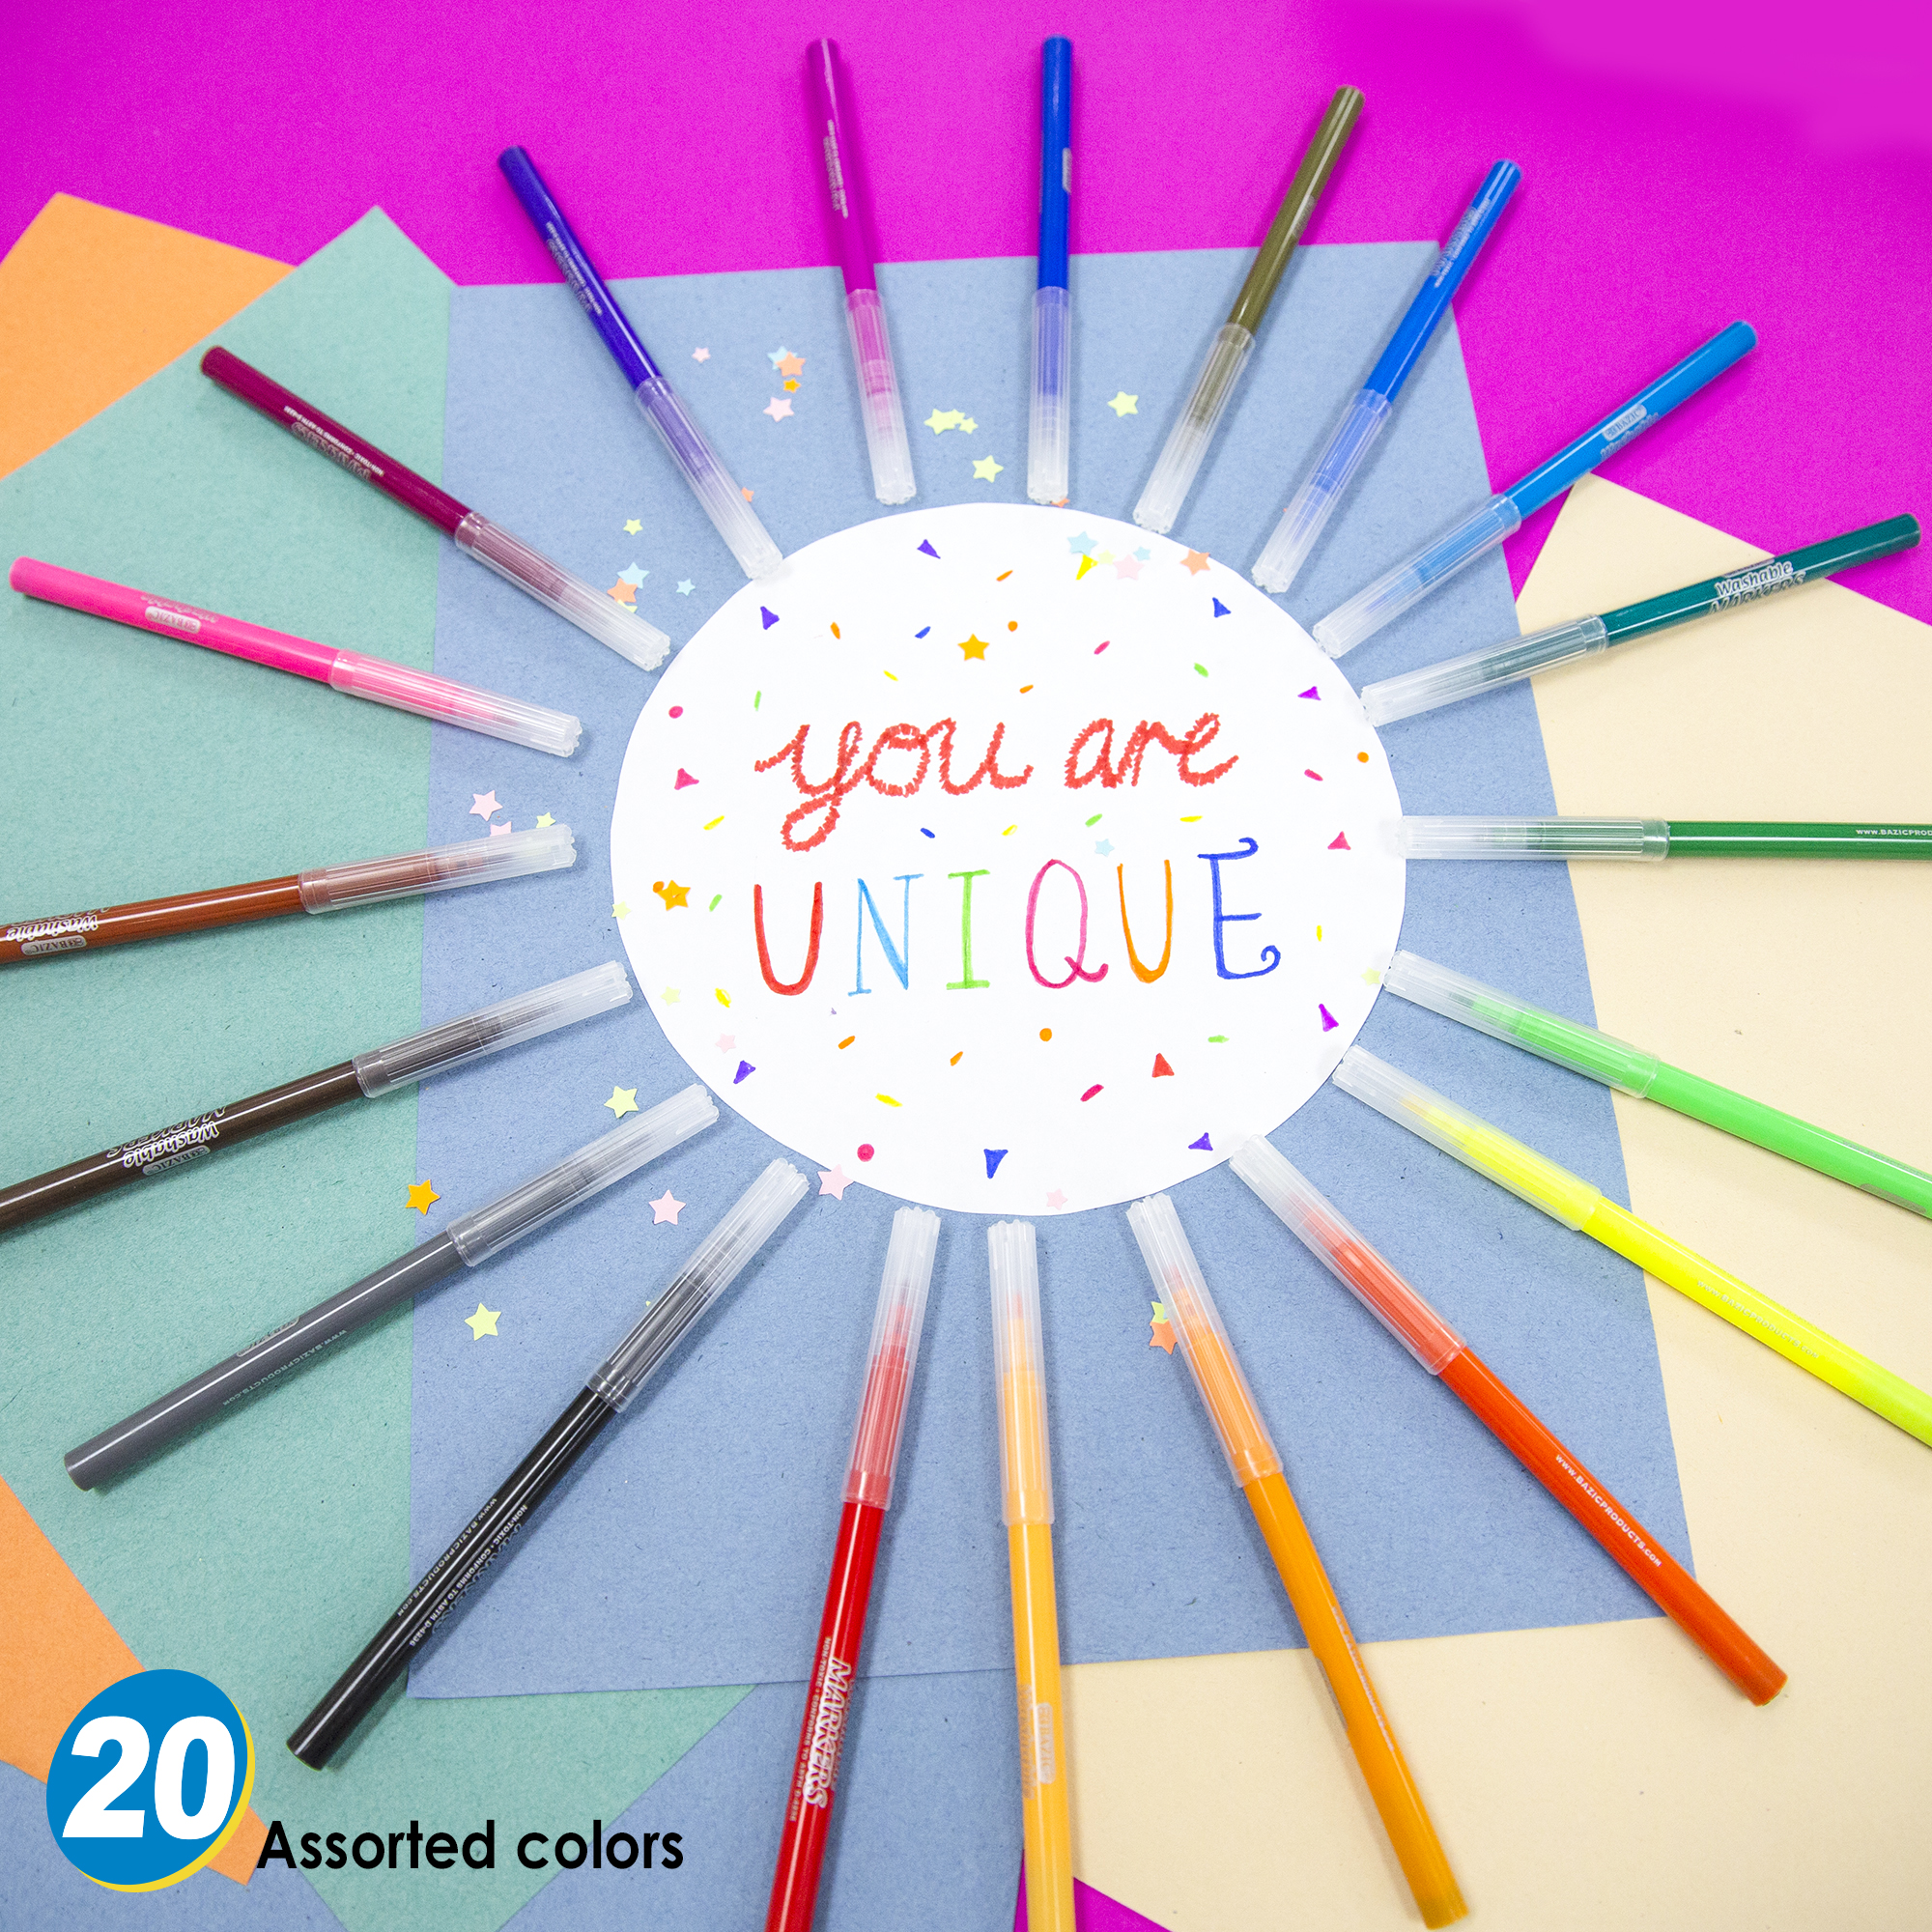  BAZIC Washable Markers Fine Line 24 Color, Thin Tip